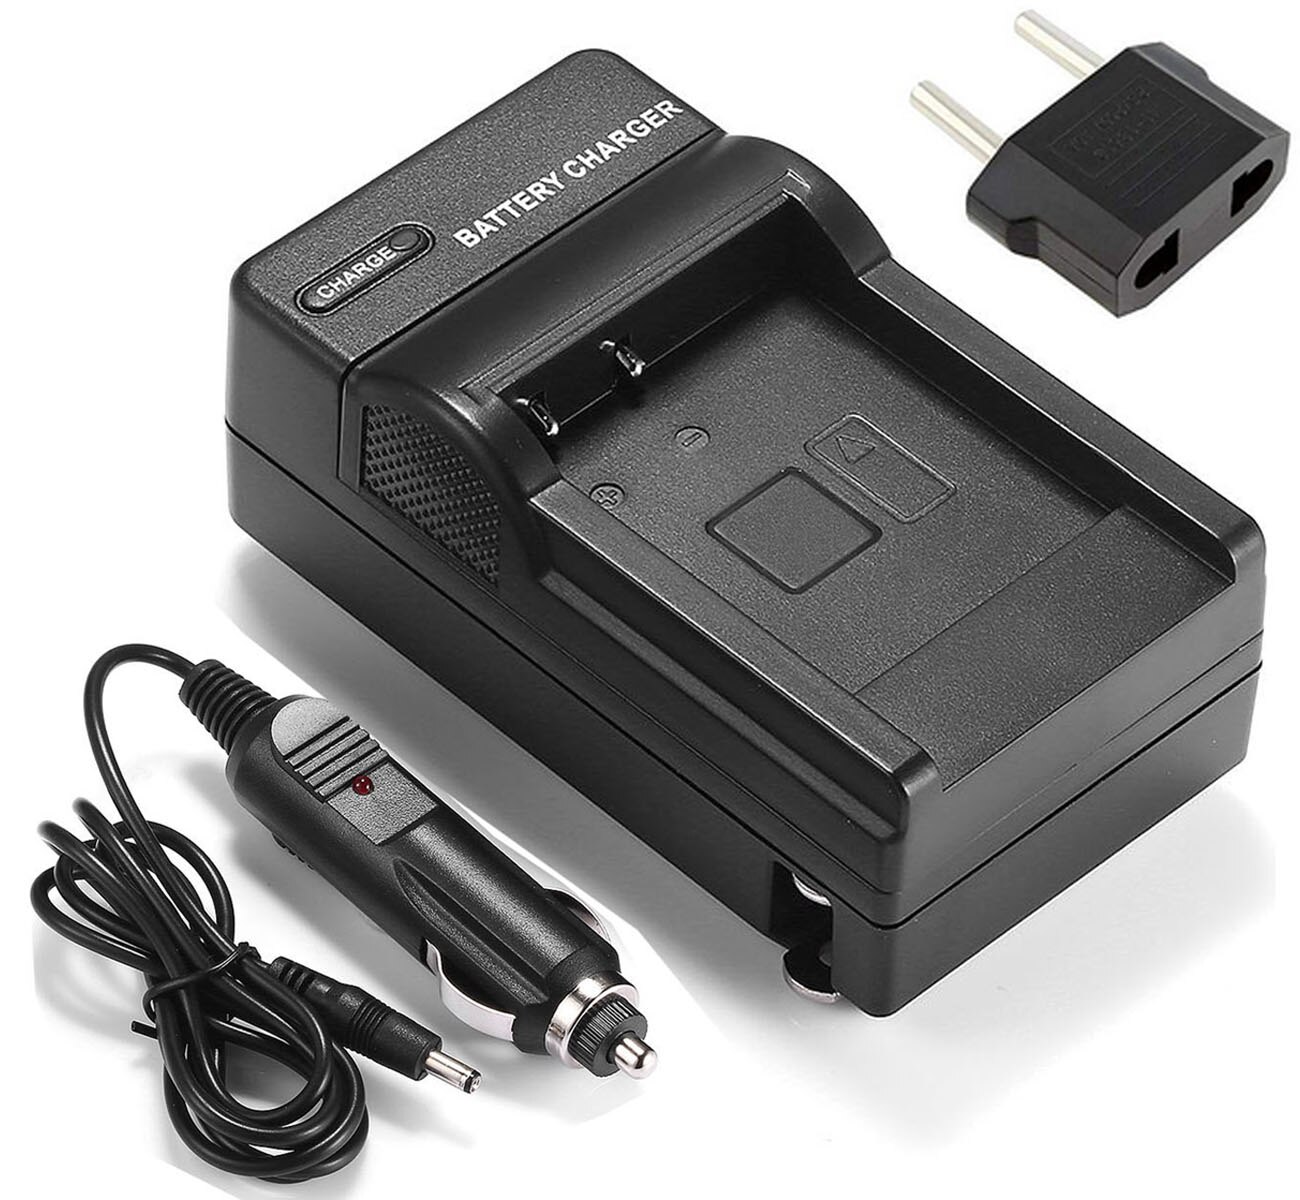 Batterij Lader Voor Sony Cyber-Shot DSC-TF1, TX5, TX7, TX9, TX10, TX20, TX30, TX55, TX66, TX100V, TX200V, TX300V Digitale Camera: Wall and Car Charger